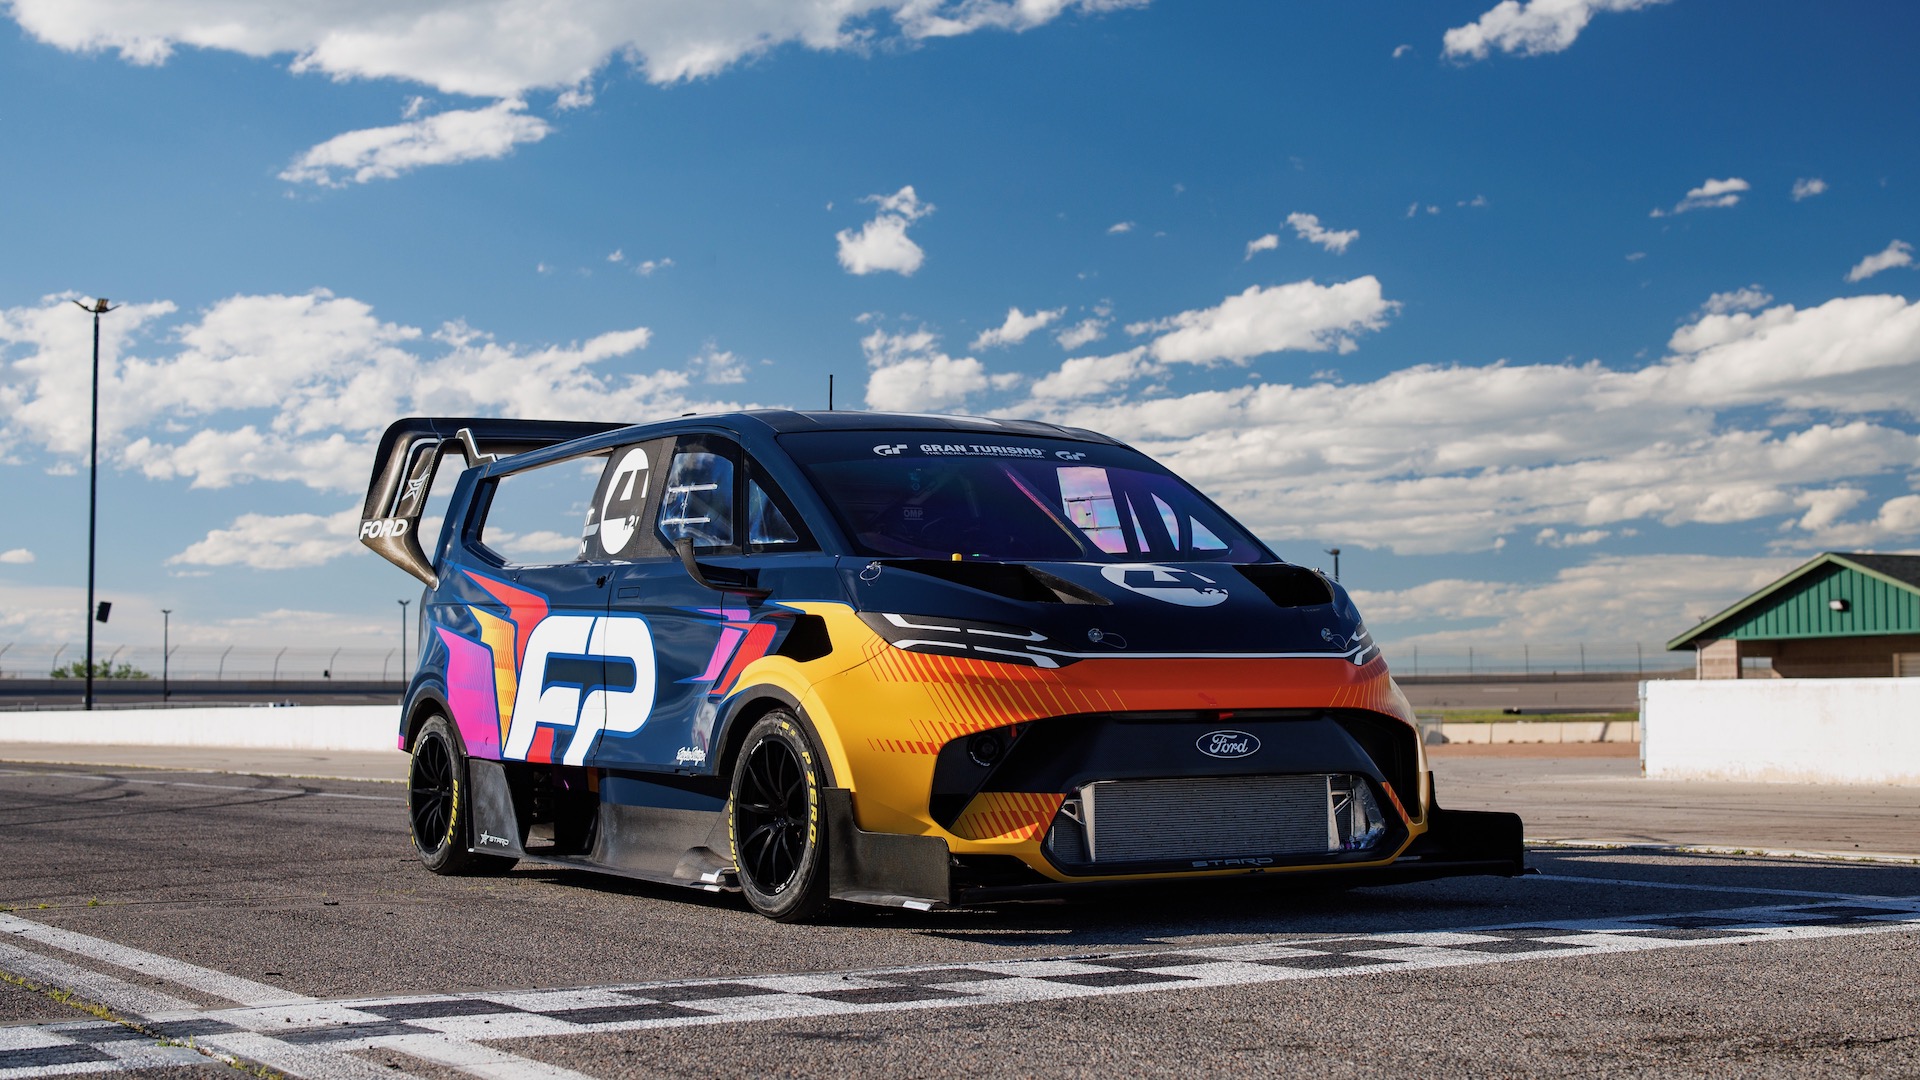 Ford Supervan 4.2 aims for Pikes Peak with over 1,400 hp and 4,400